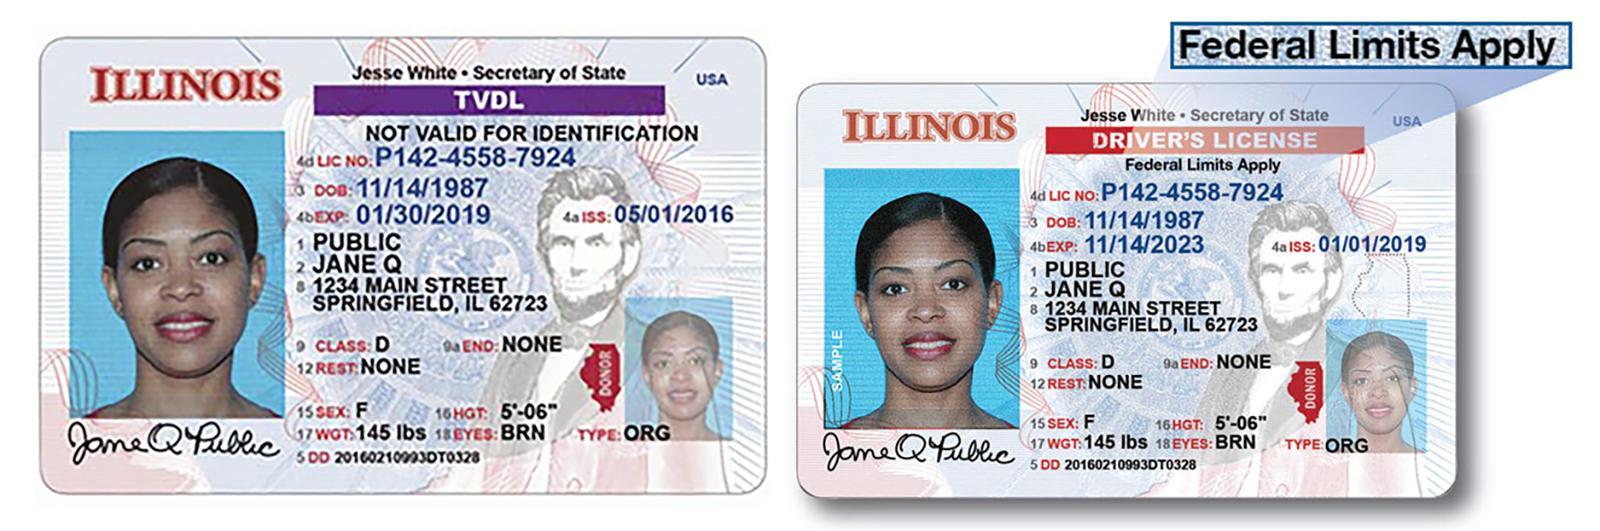 At left is the Temporary Visitor Driver’s License and at right is the standard licenses that all noncitizen residents of Illinois can receive, provided they meet residency and insurance requirements. (Illinois Secretary of State)